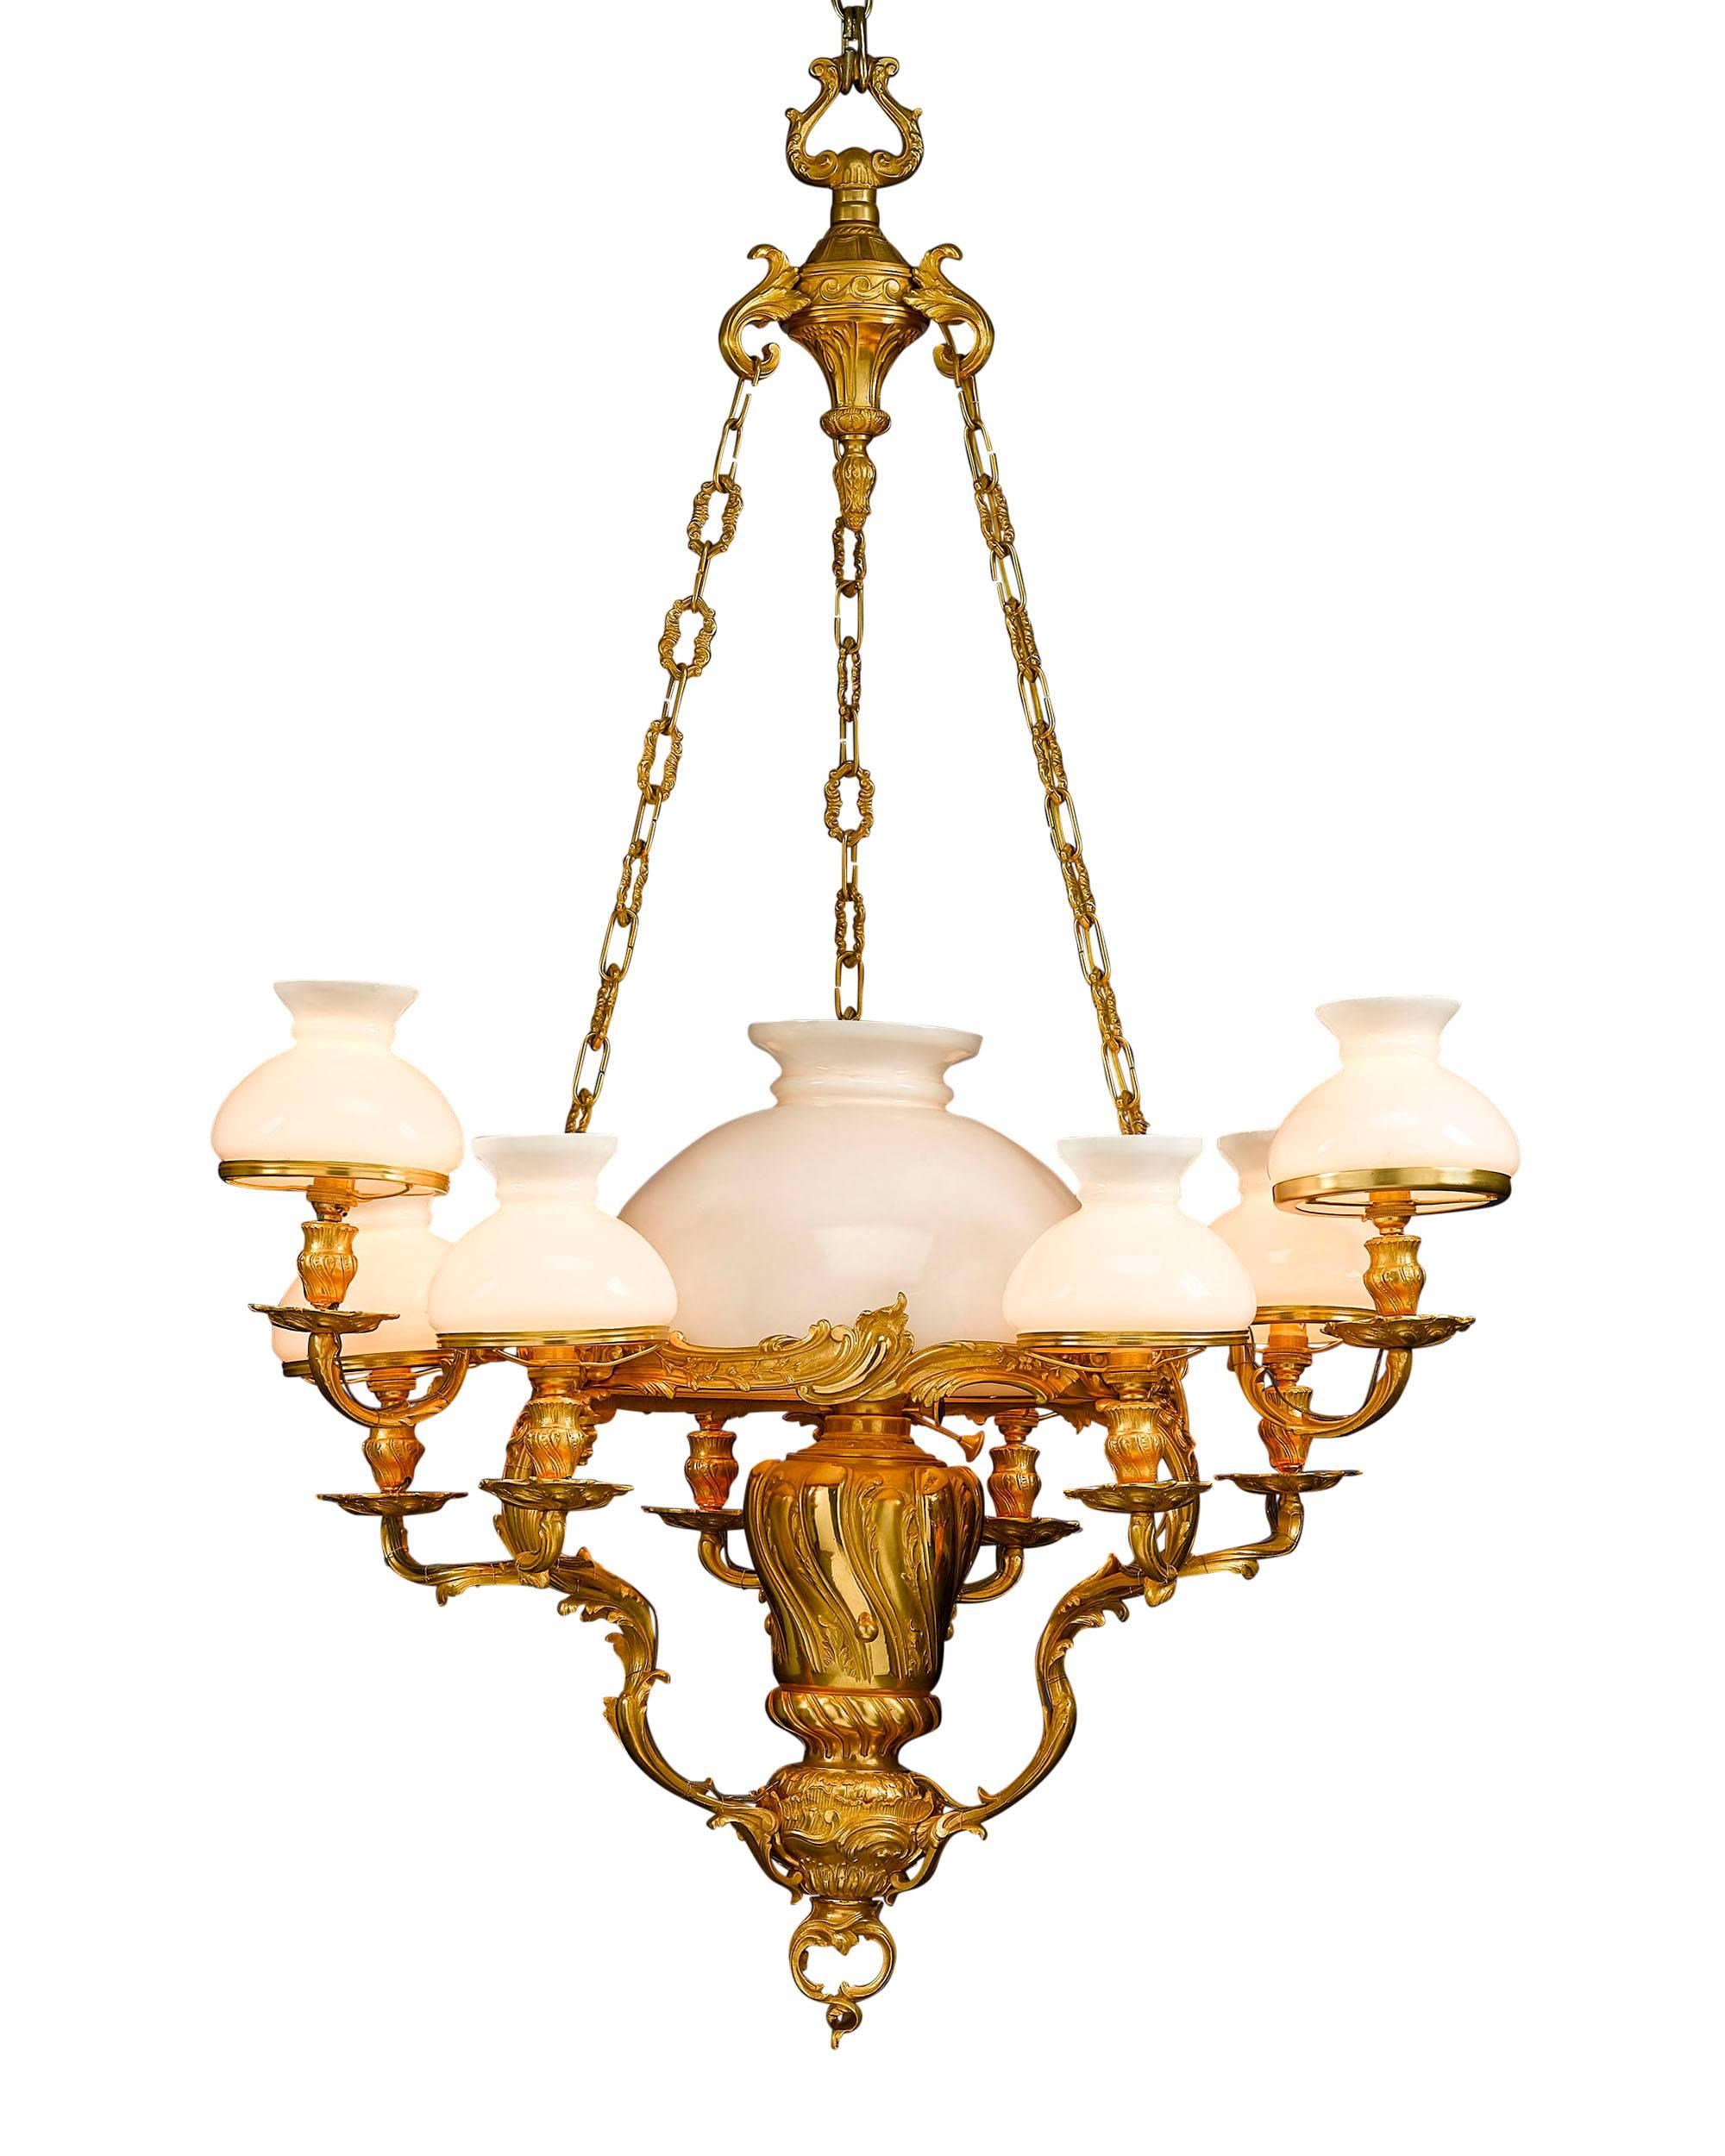 This refined ten-light chandelier is a grand example of 19th century French opulence. Crafted in the Louis XV style, this fixture emits a soft glow thanks to a large central light surrounded by three arms of three lights each, all shaded by frosted